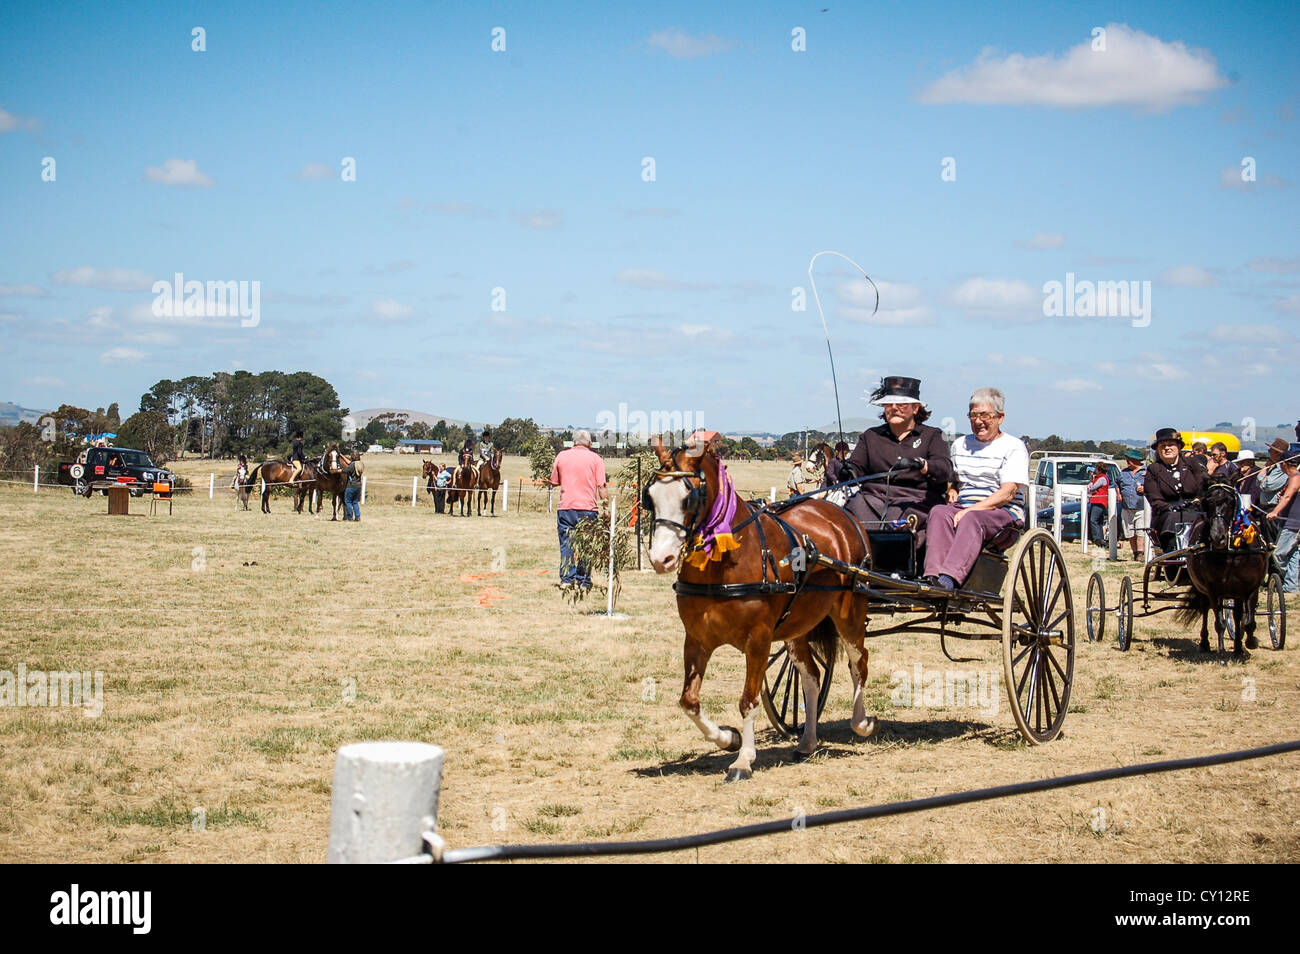 Horses and carts in competition at annual Clunes Show in rural town of Clunes, Country Victoria, Australia. Stock Photo